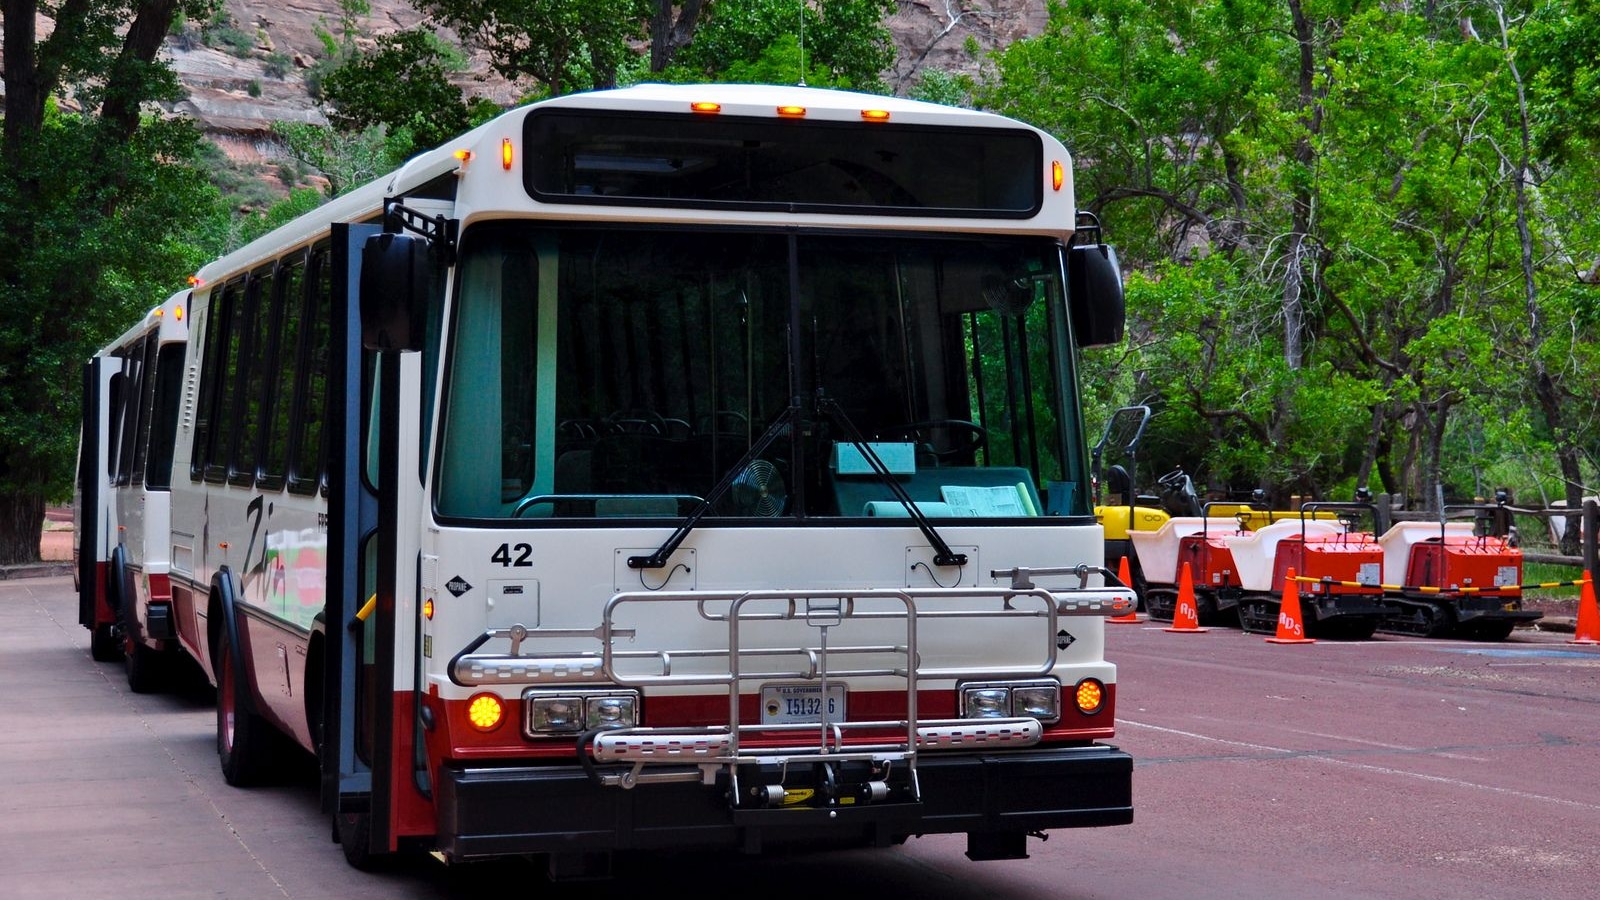 Zion National Park shuttle bus by Flickr user faungg's photos (Used under CC License)